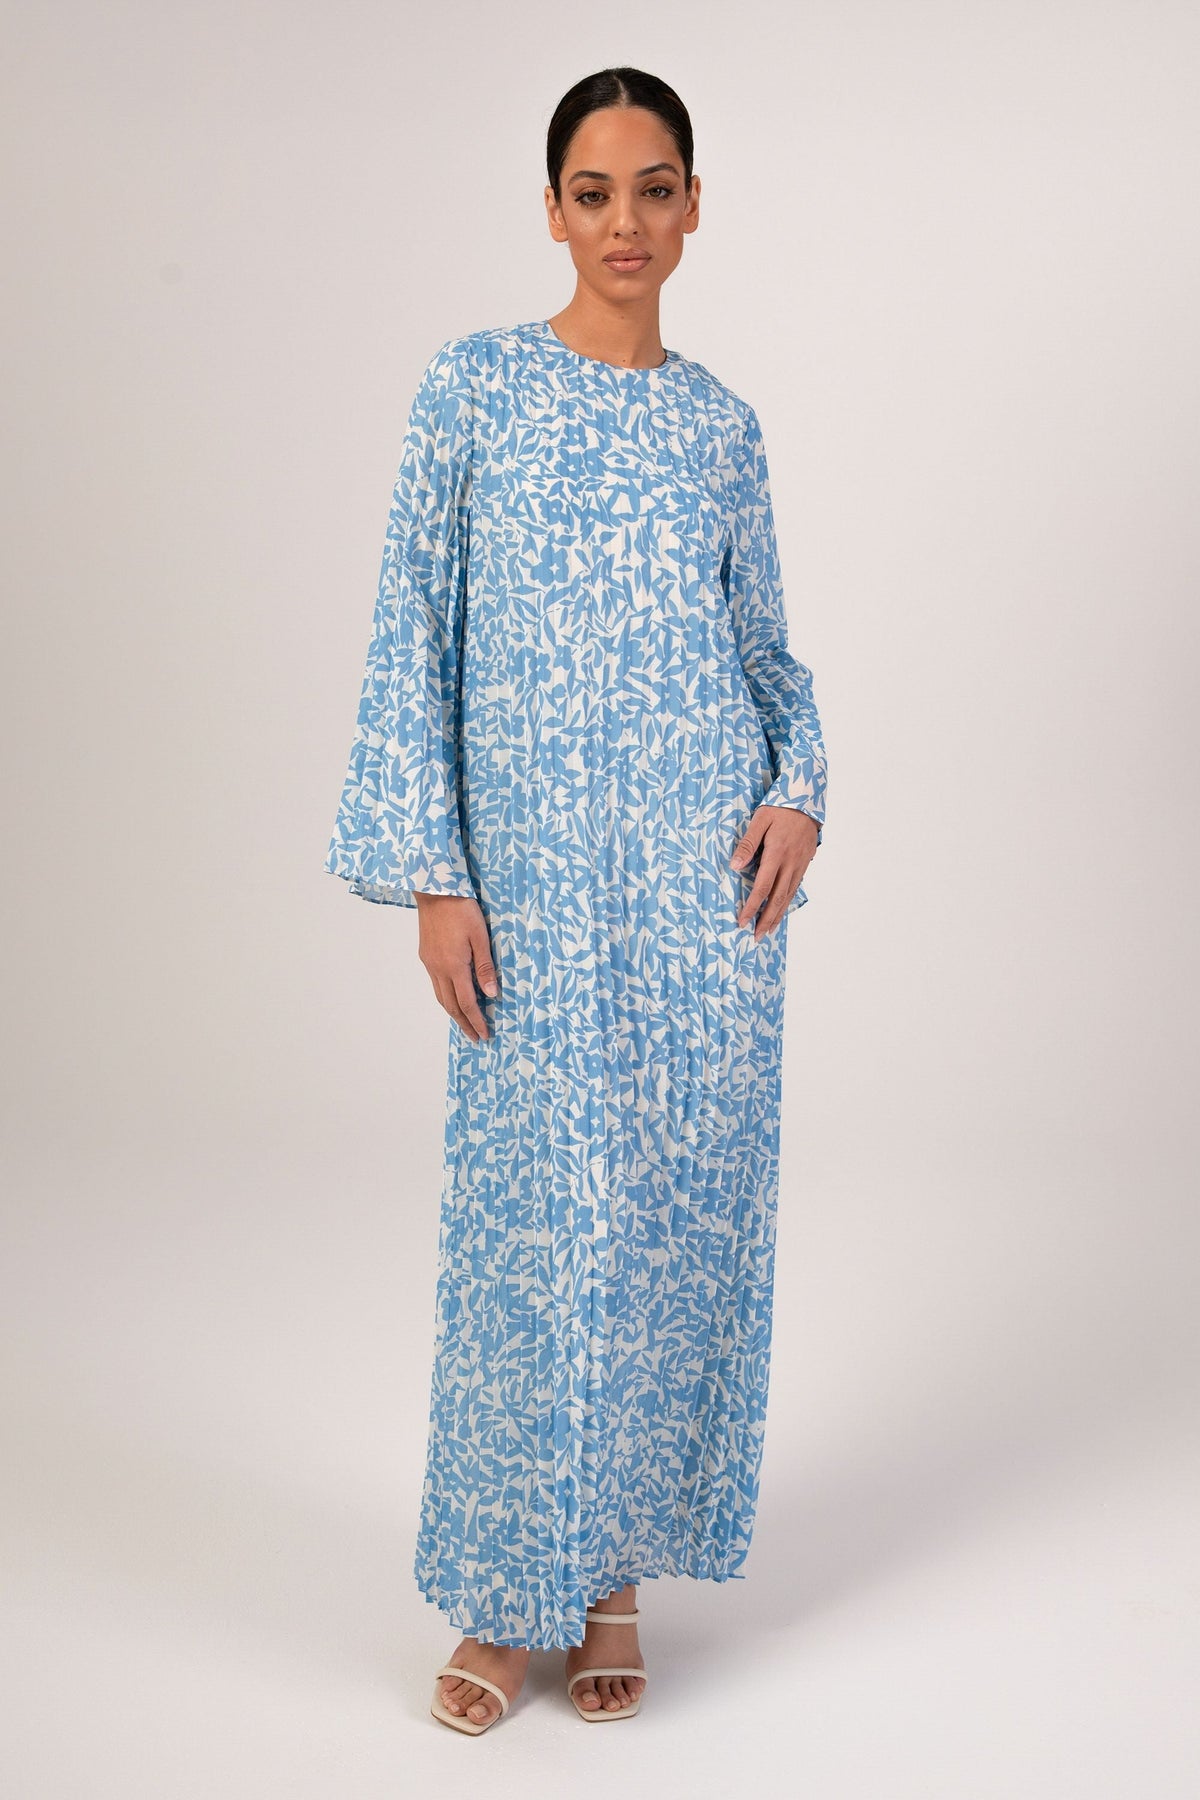 Pleated Printed Shift Maxi Dress - Azure Blue Veiled Collection 